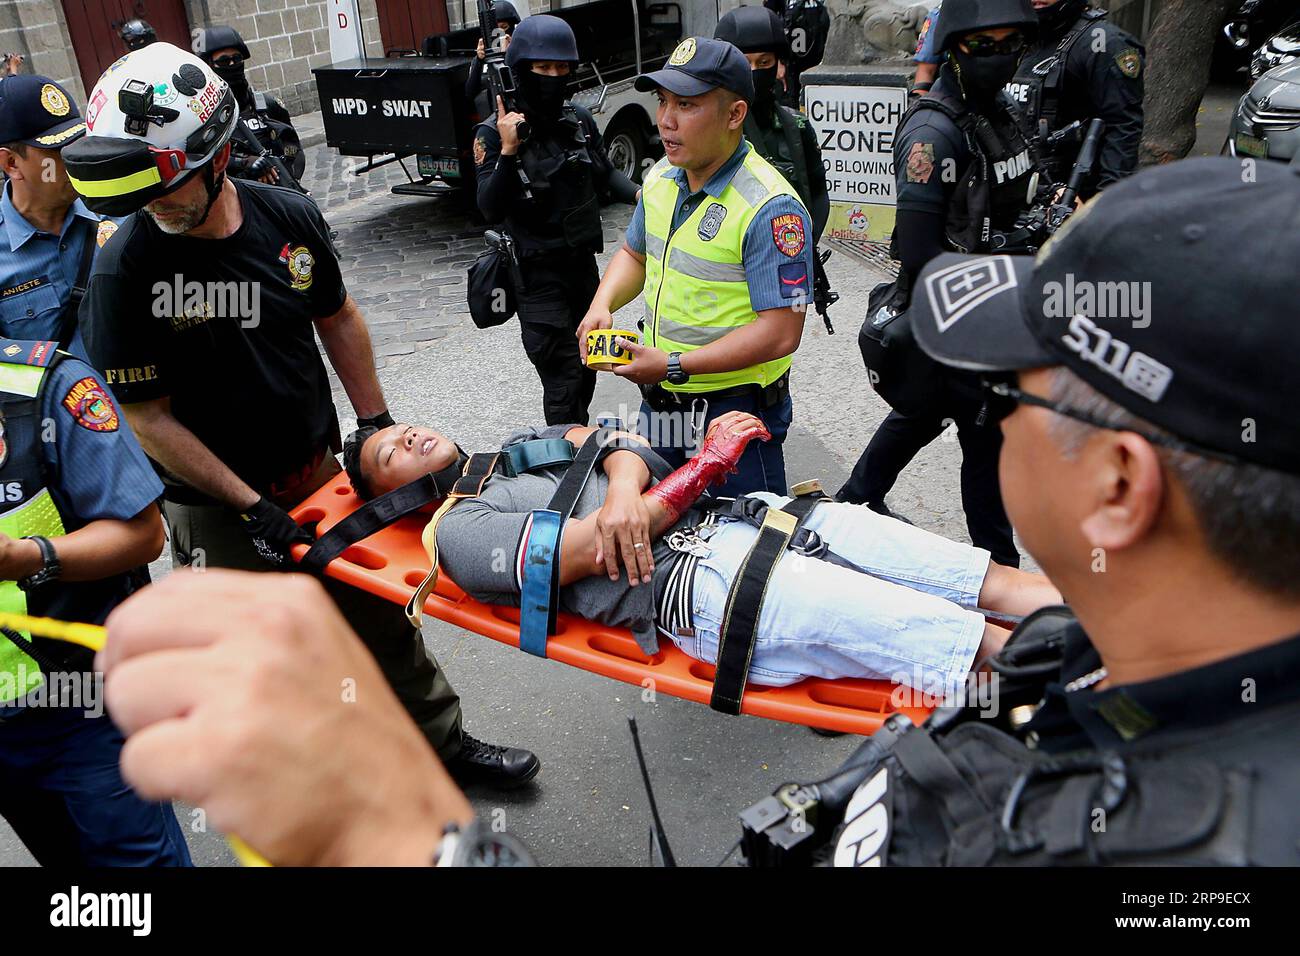 (190404) -- MANILA, April 4, 2019 -- Members of the Philippine National Police (PNP) and rescuers carry a mock terrorism victim during an anti-terrorism drill in Manila, the Philippines, April 4, 2019. Philippine security forces have tightened security after Wednesday s blast in southern Philippine Isulan town in Sultan Kudarat province that wounded 18 people at least, a military general said on Thursday. ) PHILIPPINES-MANILA-ANTI-TERRORISM DRILL ROUELLExUMALI PUBLICATIONxNOTxINxCHN Stock Photo